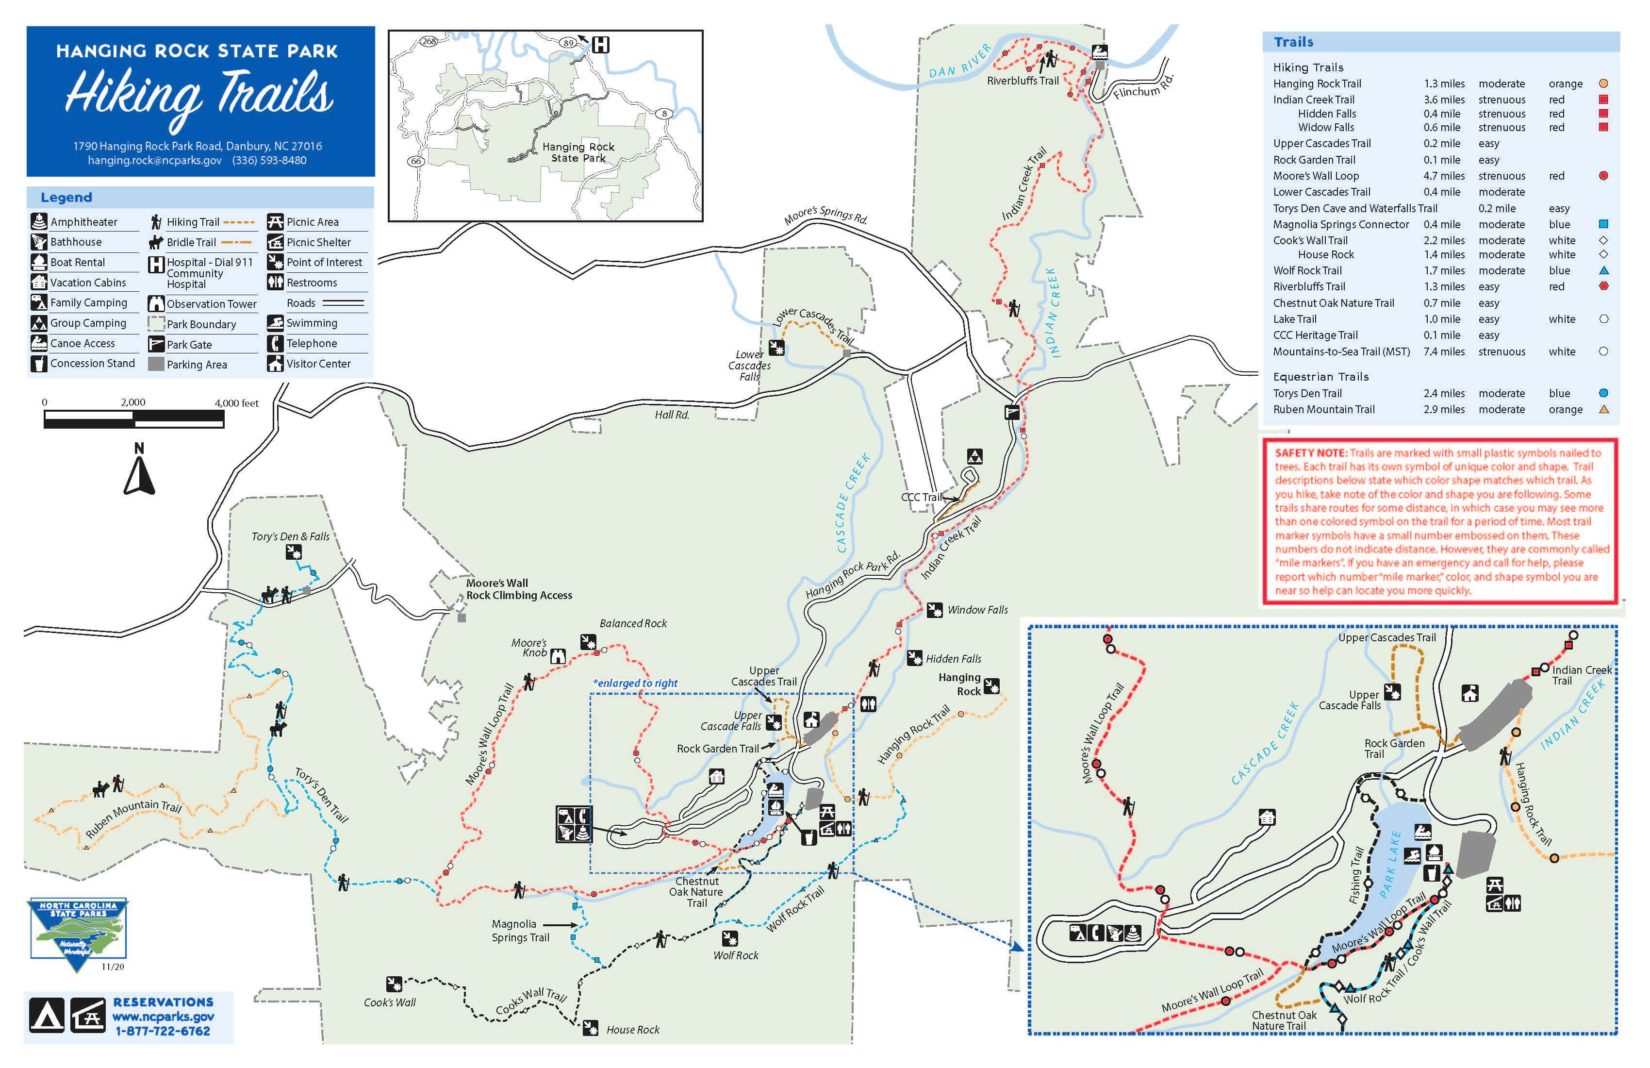 Hanging Rock State Park trail system map